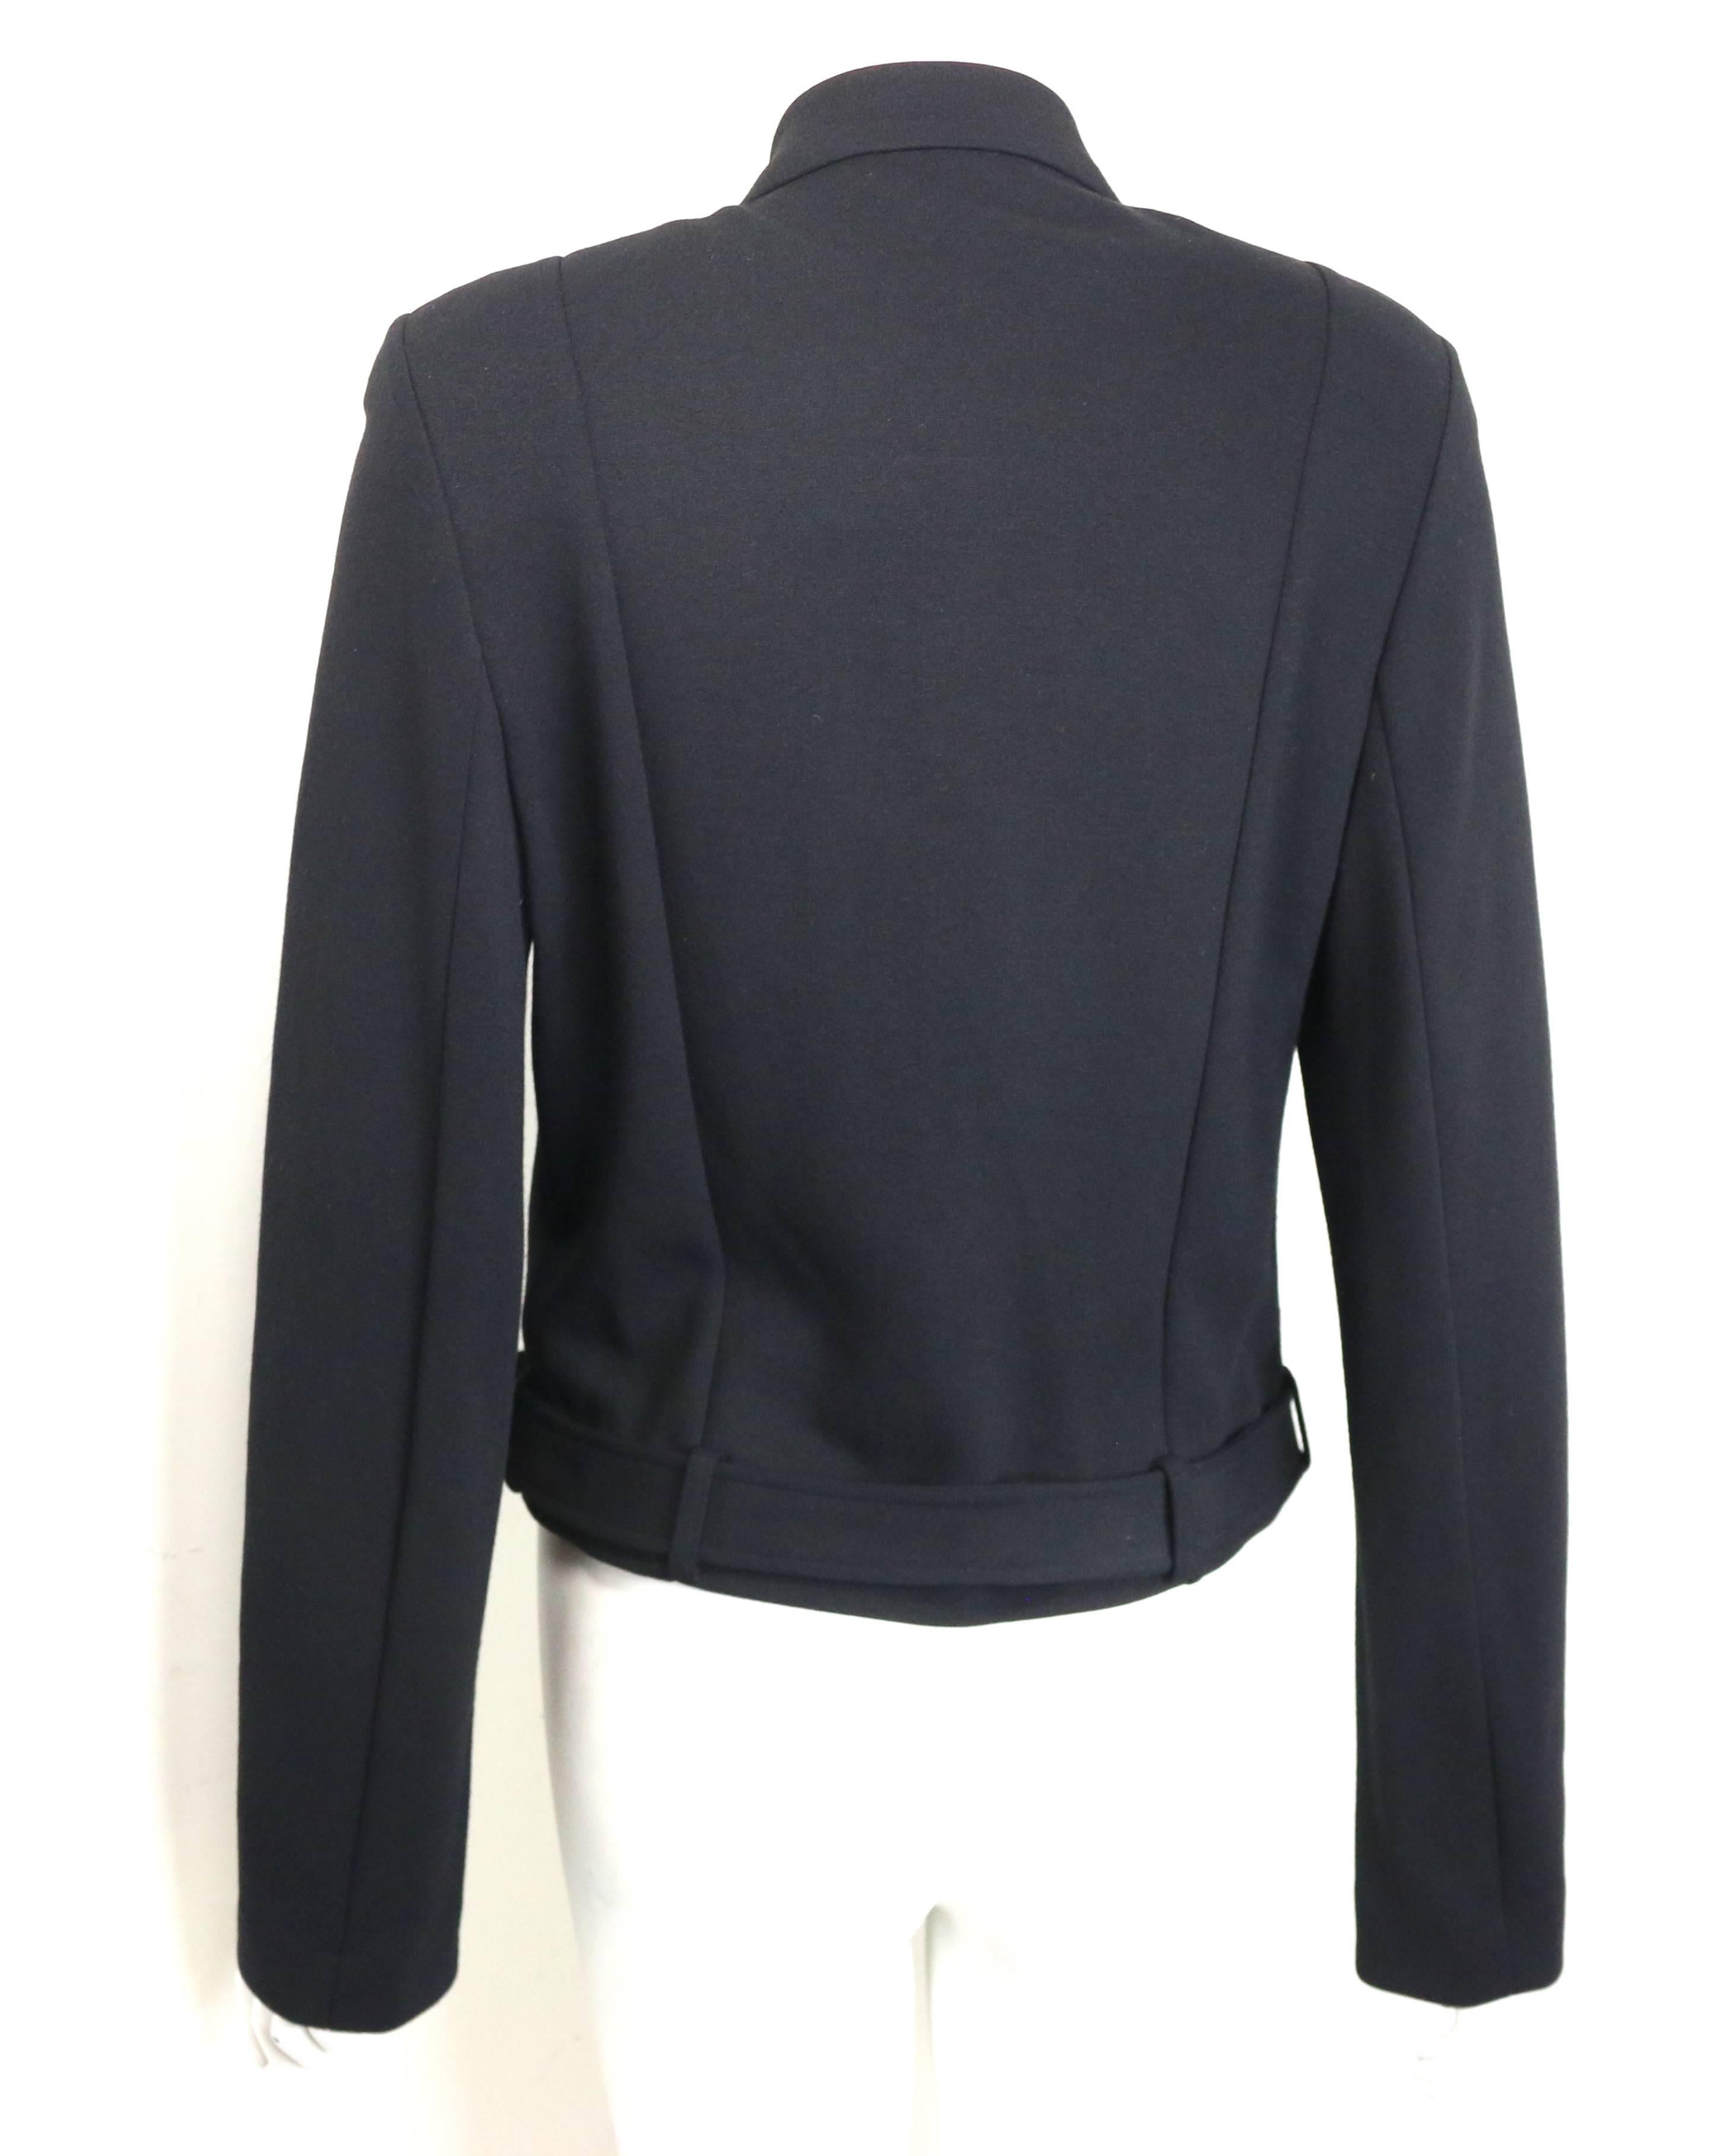 Dorothee Bis Black Mandarin Neck with Mirror Buttons and Belt Cropped Jacket In New Condition For Sale In Sheung Wan, HK